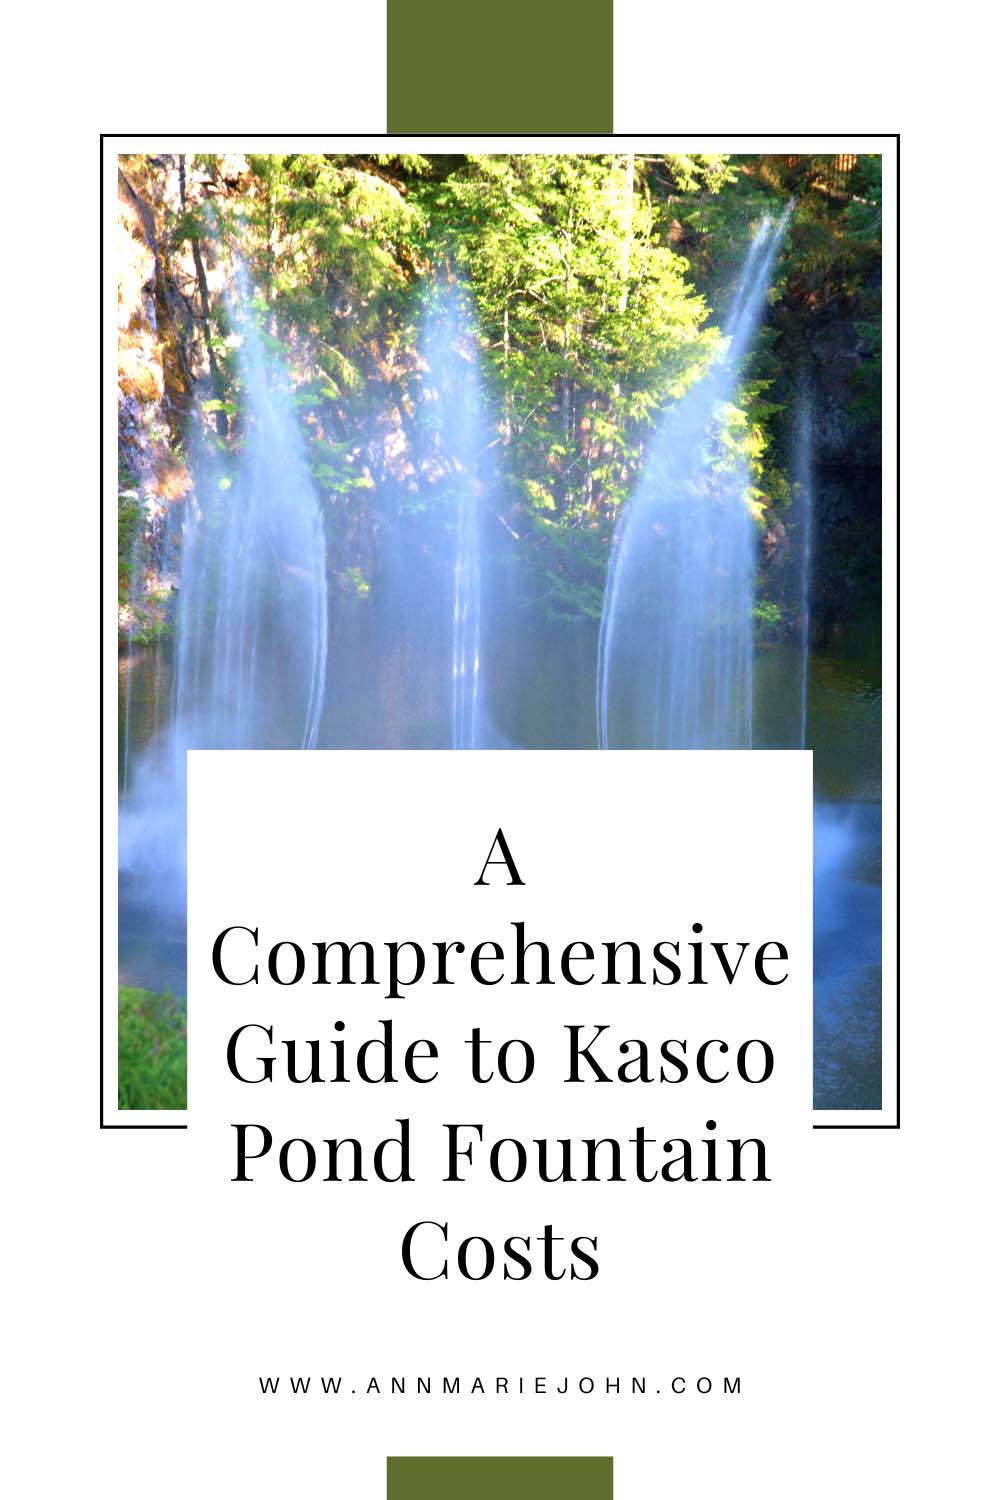 A Comprehensive Guide to Kasco Pond Fountain Costs